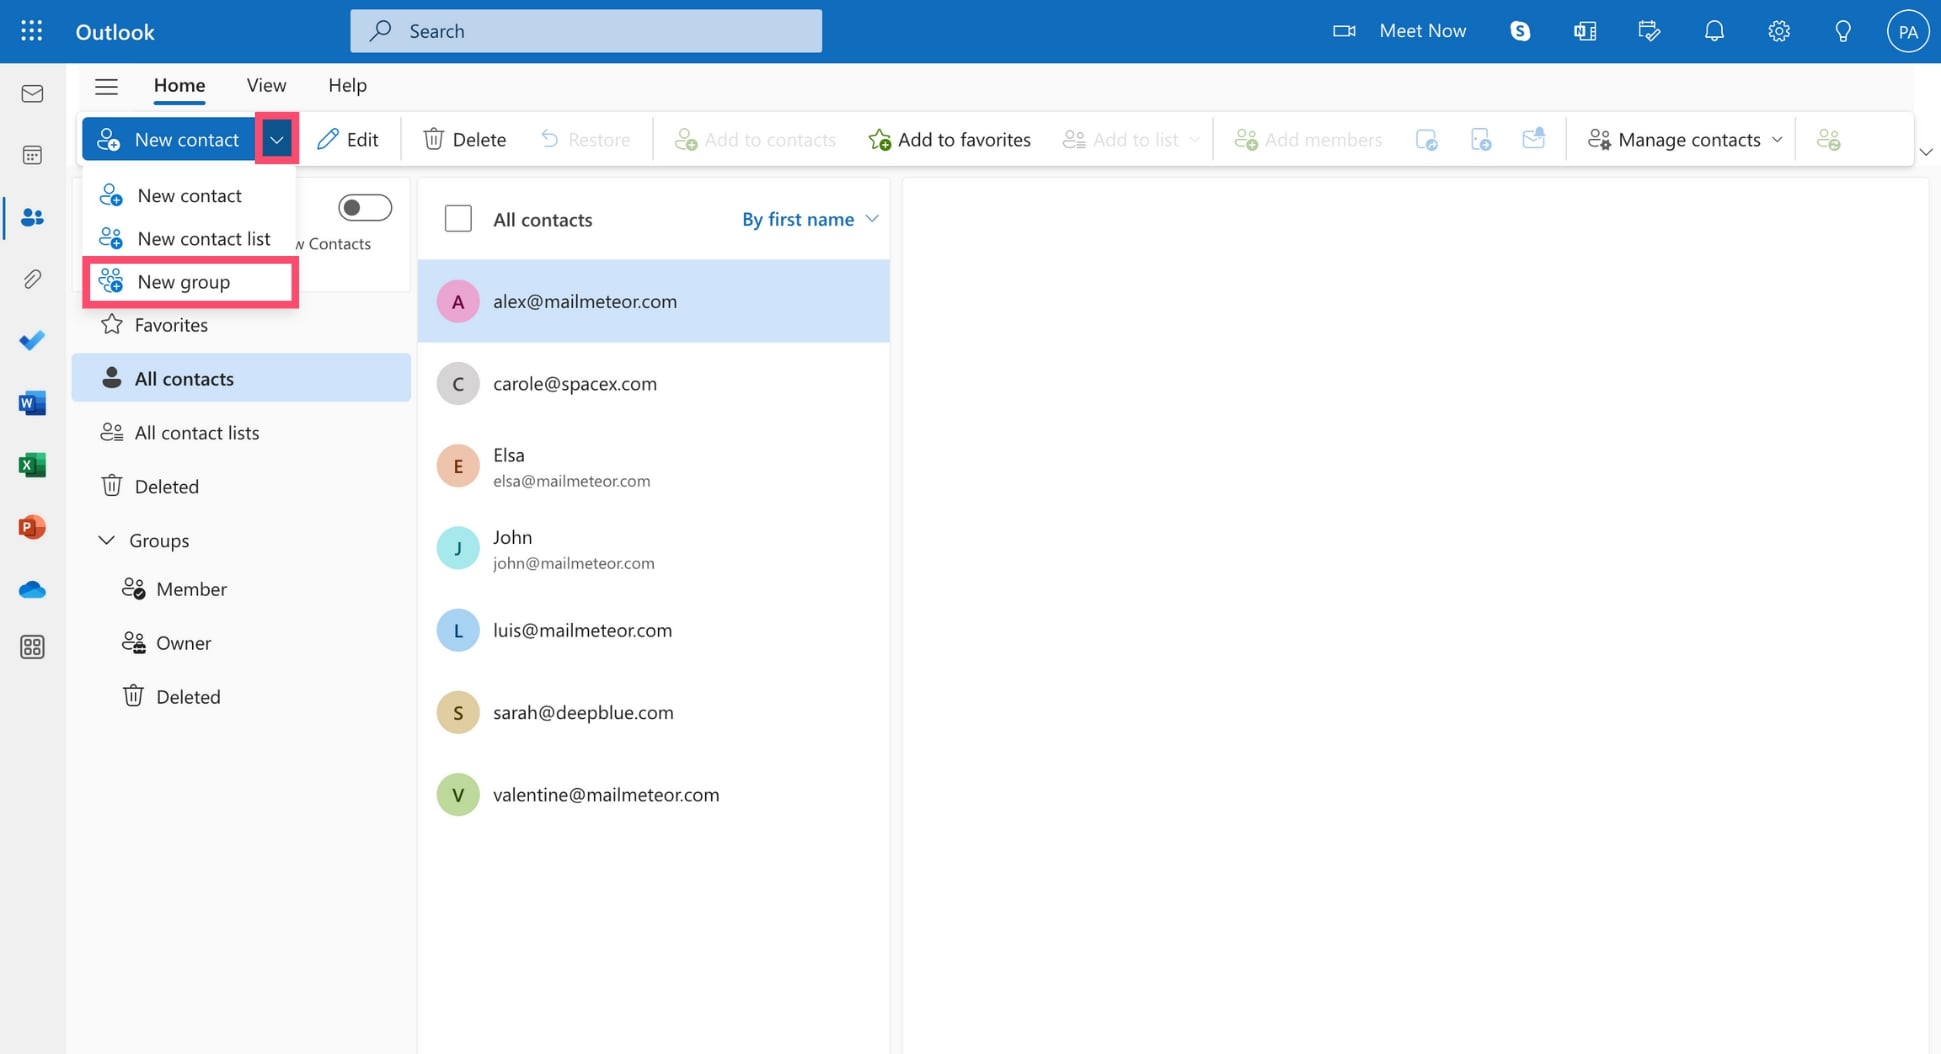 New group in Outlook